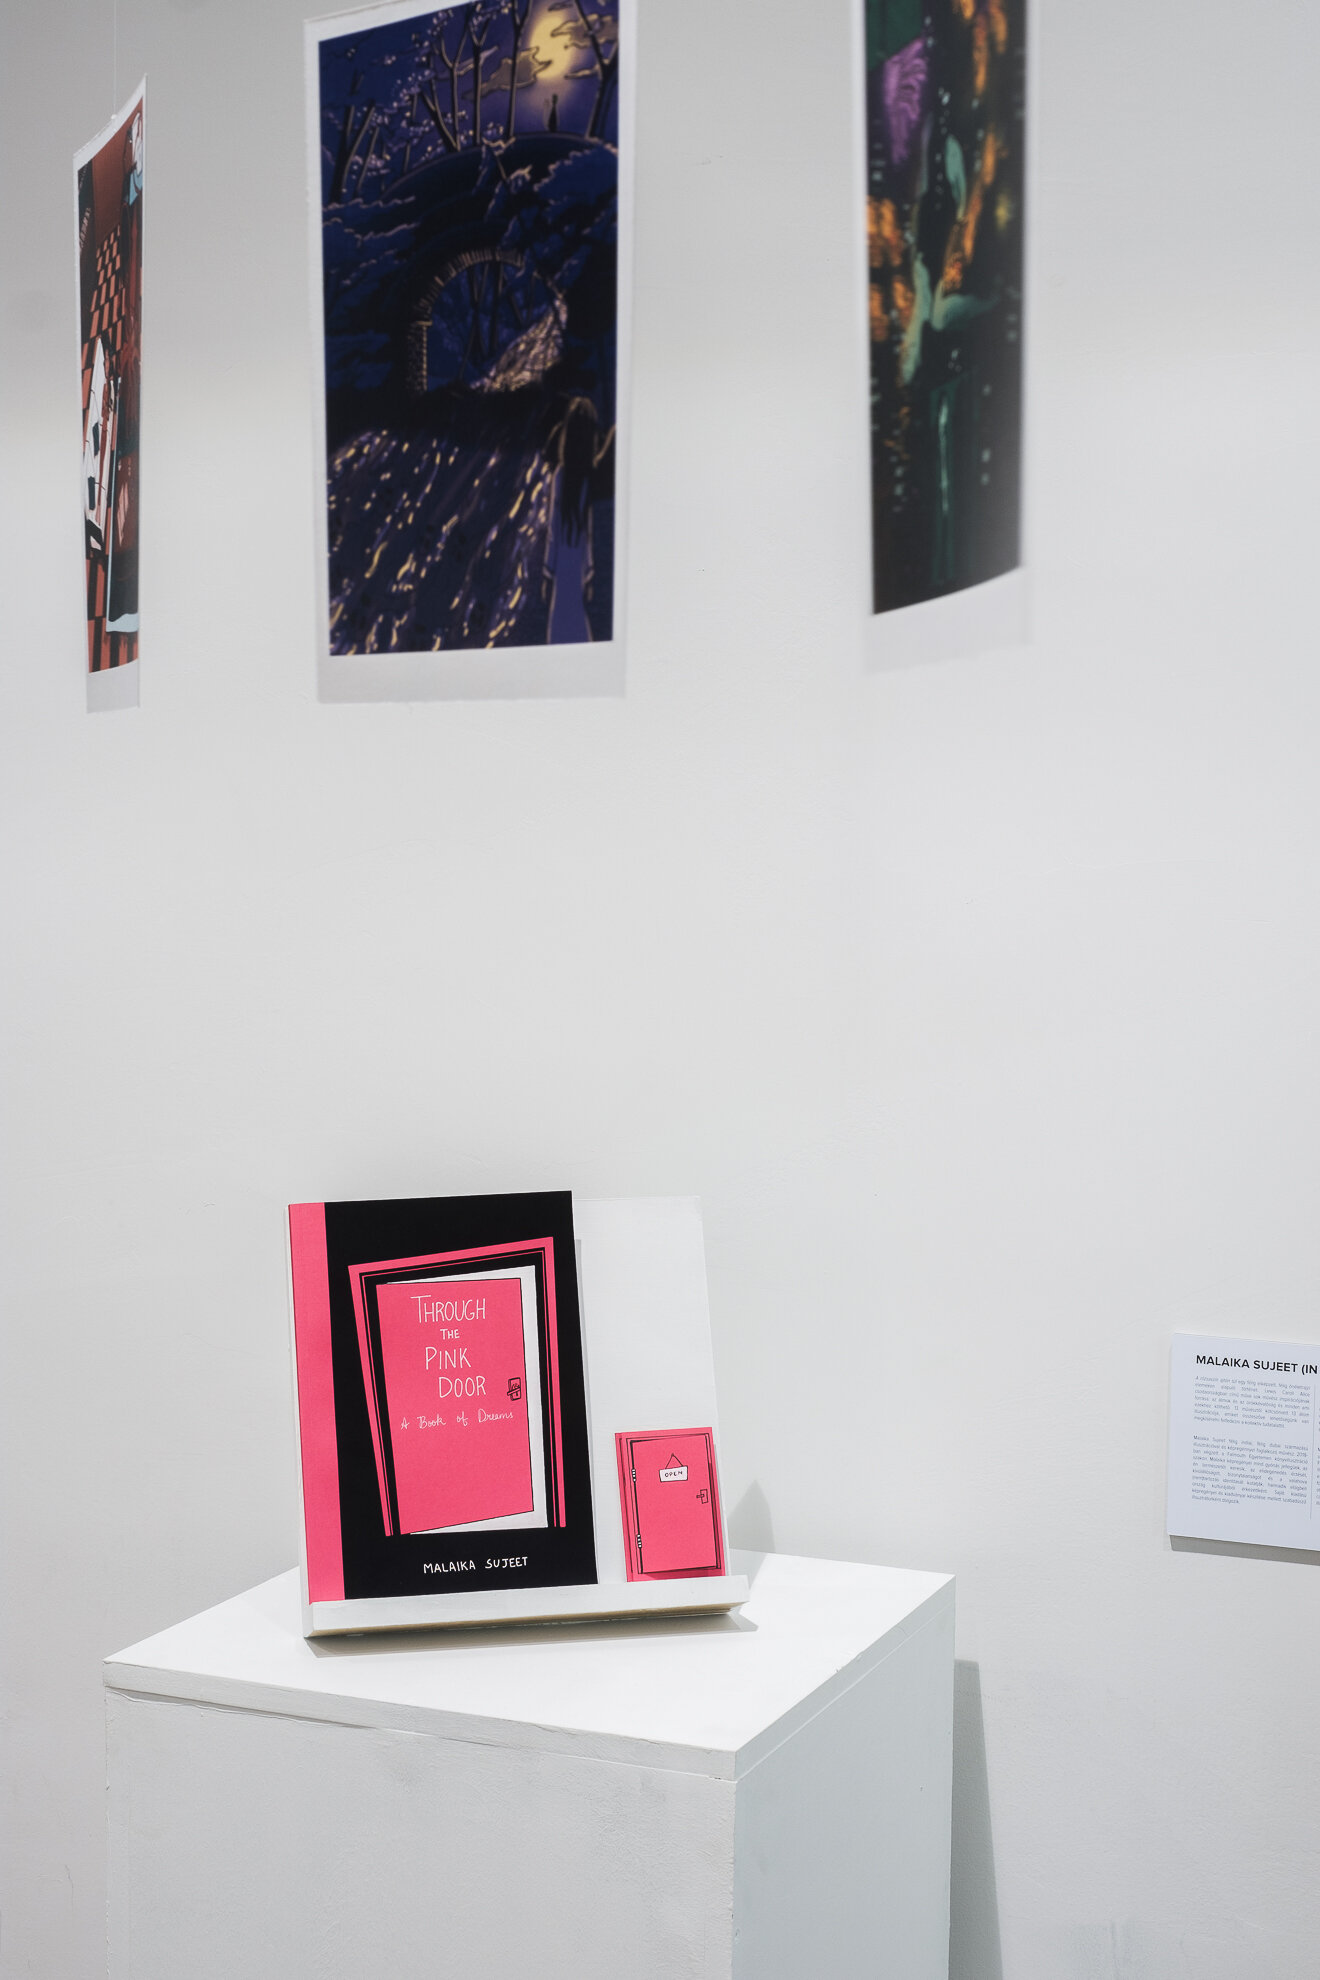   Through the Pink Door – A Book of Dreams,  2019, Book and Installation, 21 x 29.7 cm 